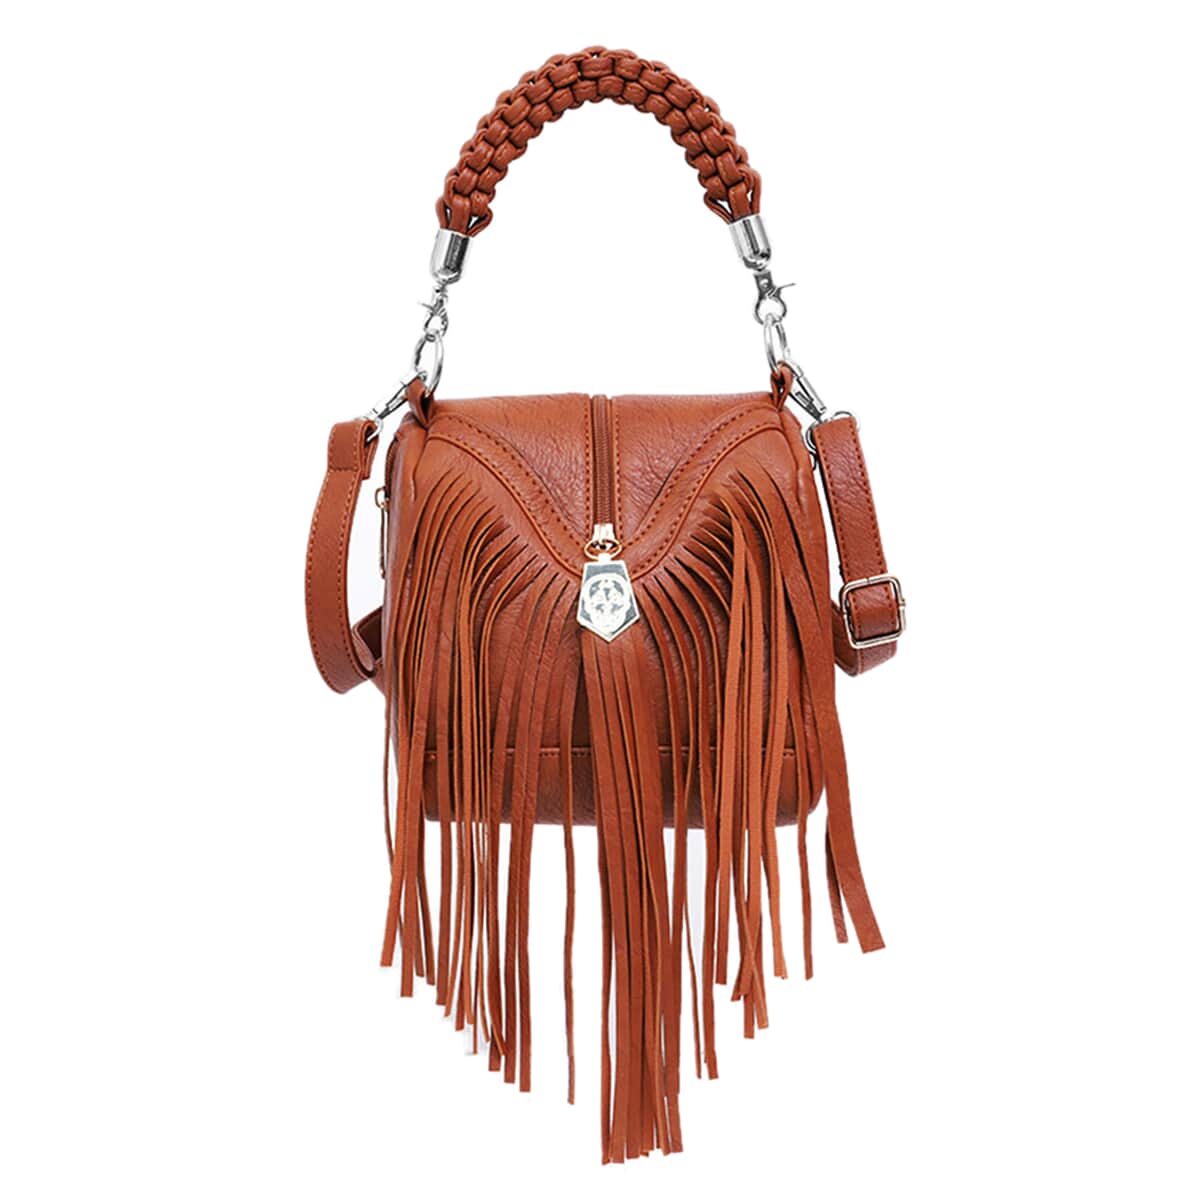 Urban Lux by TruCulture-Sofia Caramel Vegan Leather Crossbody Bag with Fringe Flap image number 0